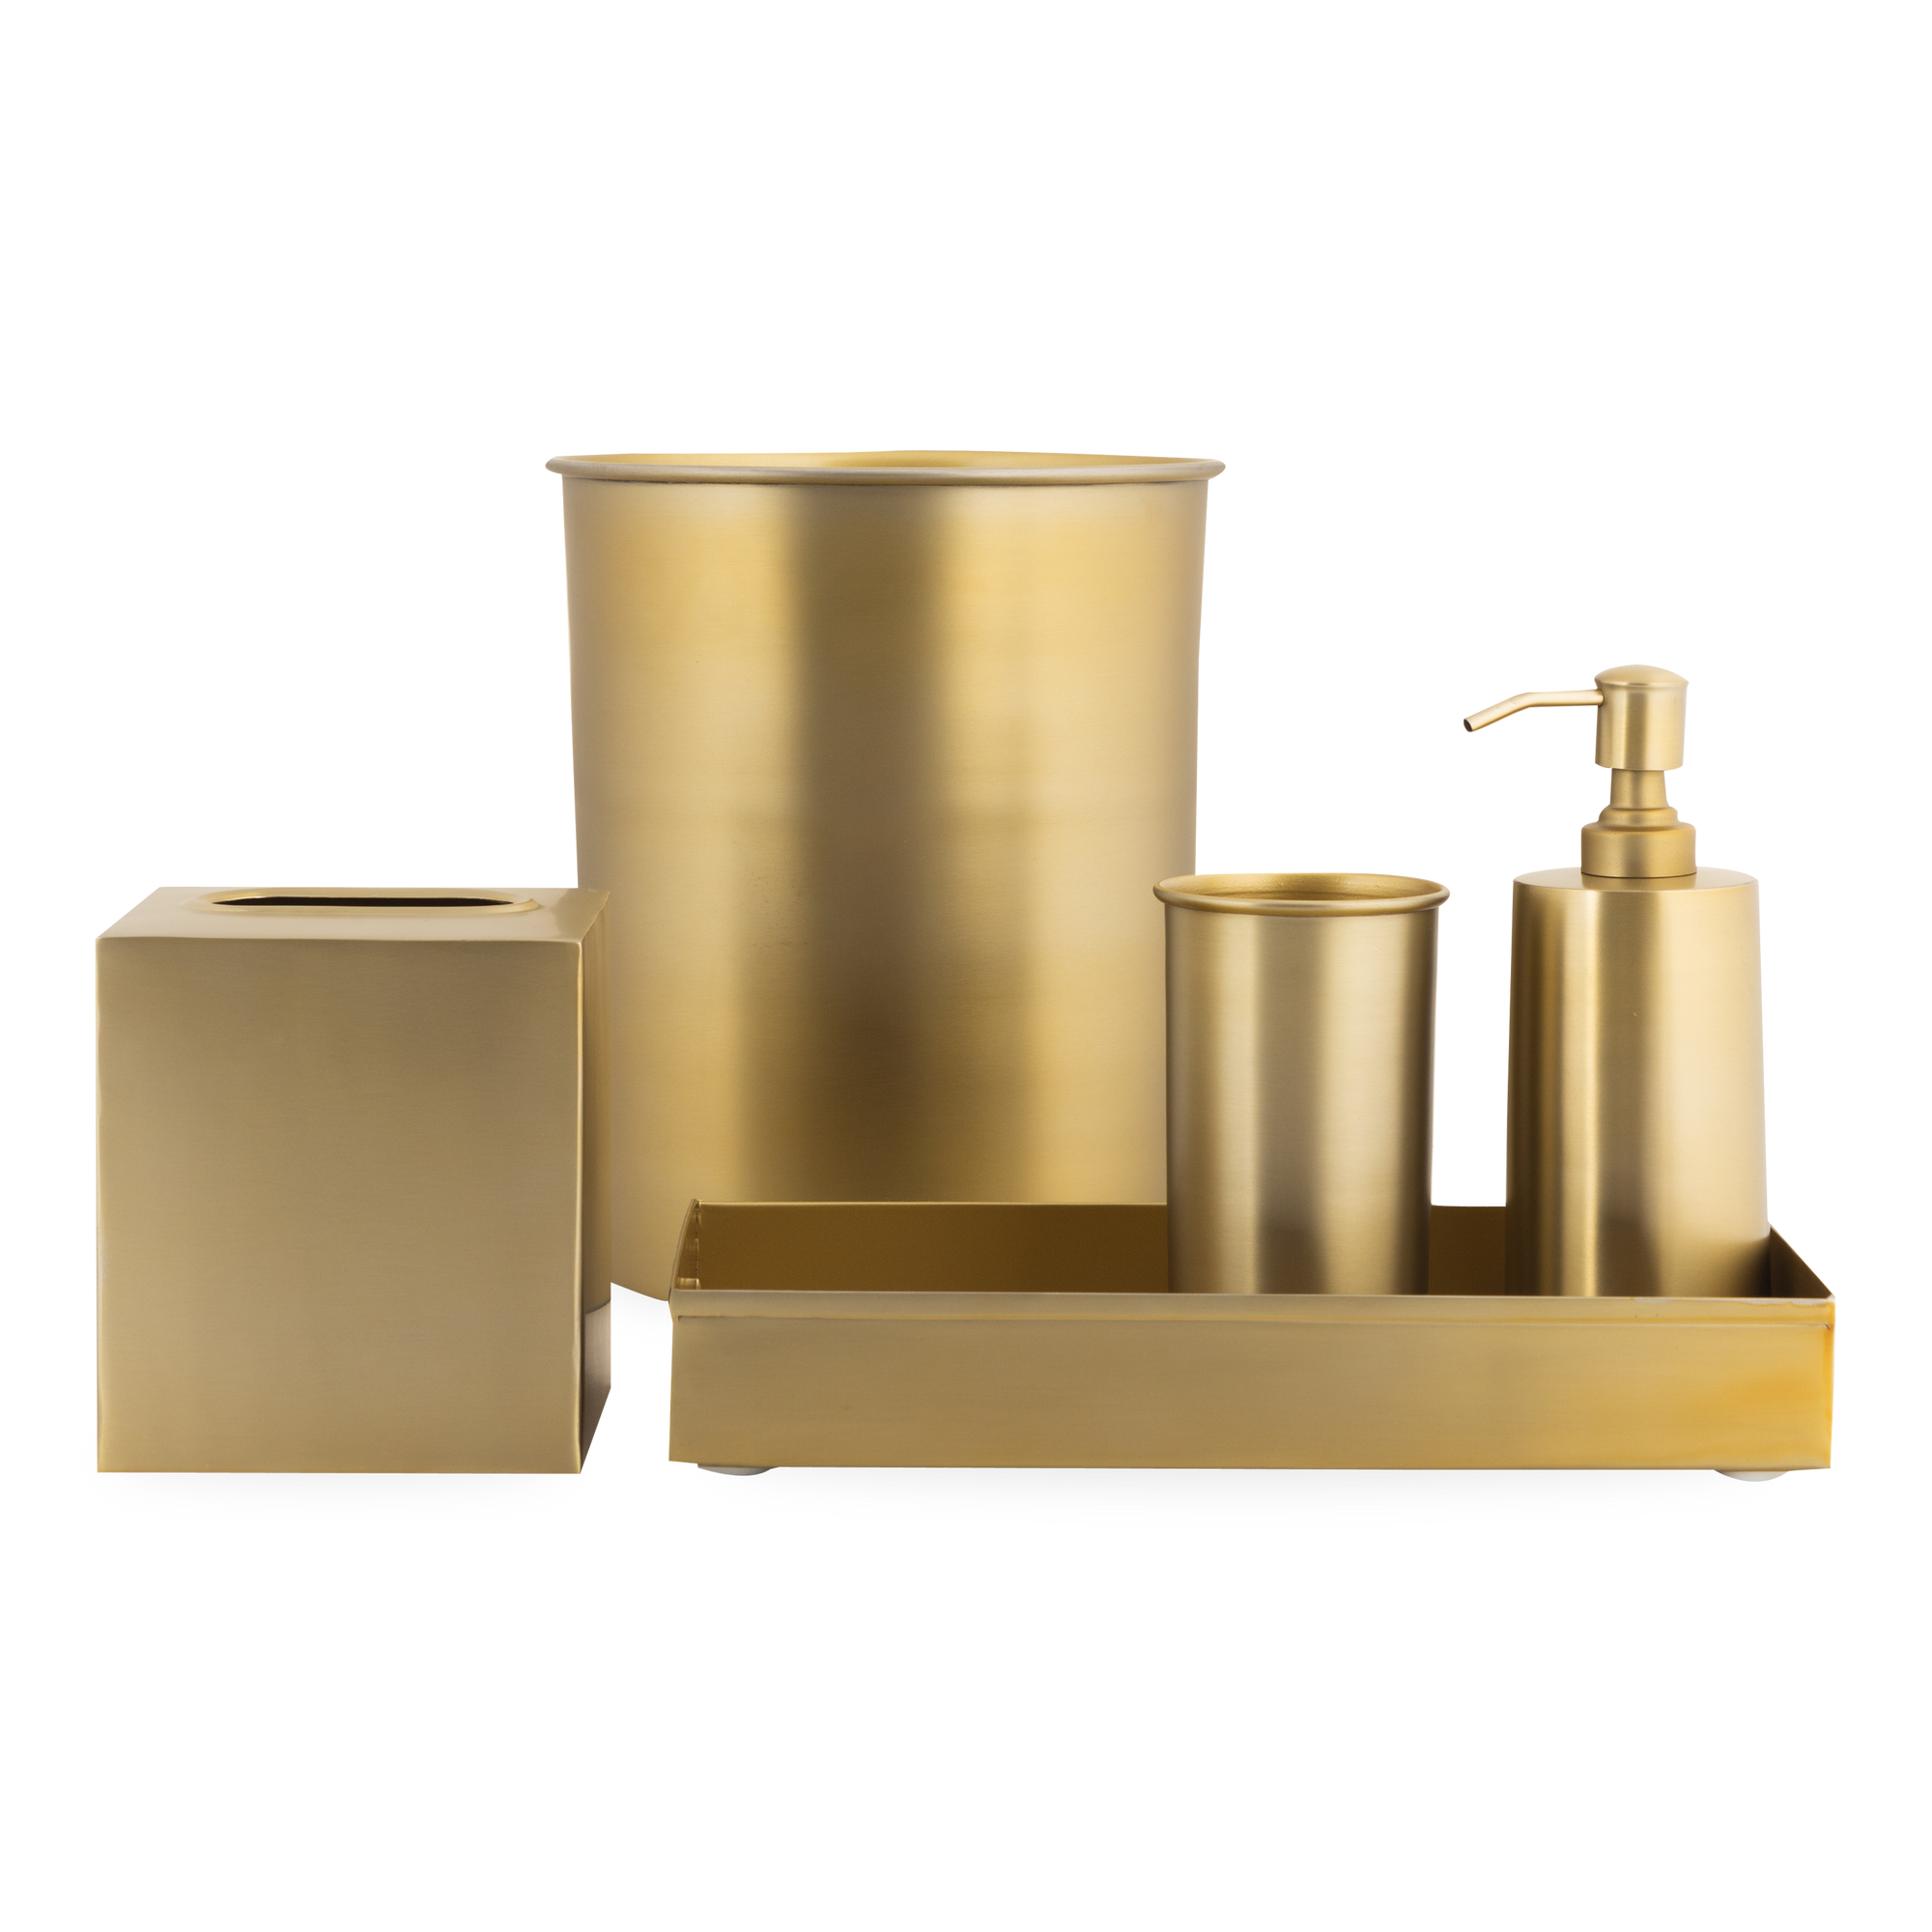 Characterized by its clean design and sleek silhouettes, the Essential Collection features an effortlessly elegant matte brass finish that will elevate any bathroom or kitchen coun